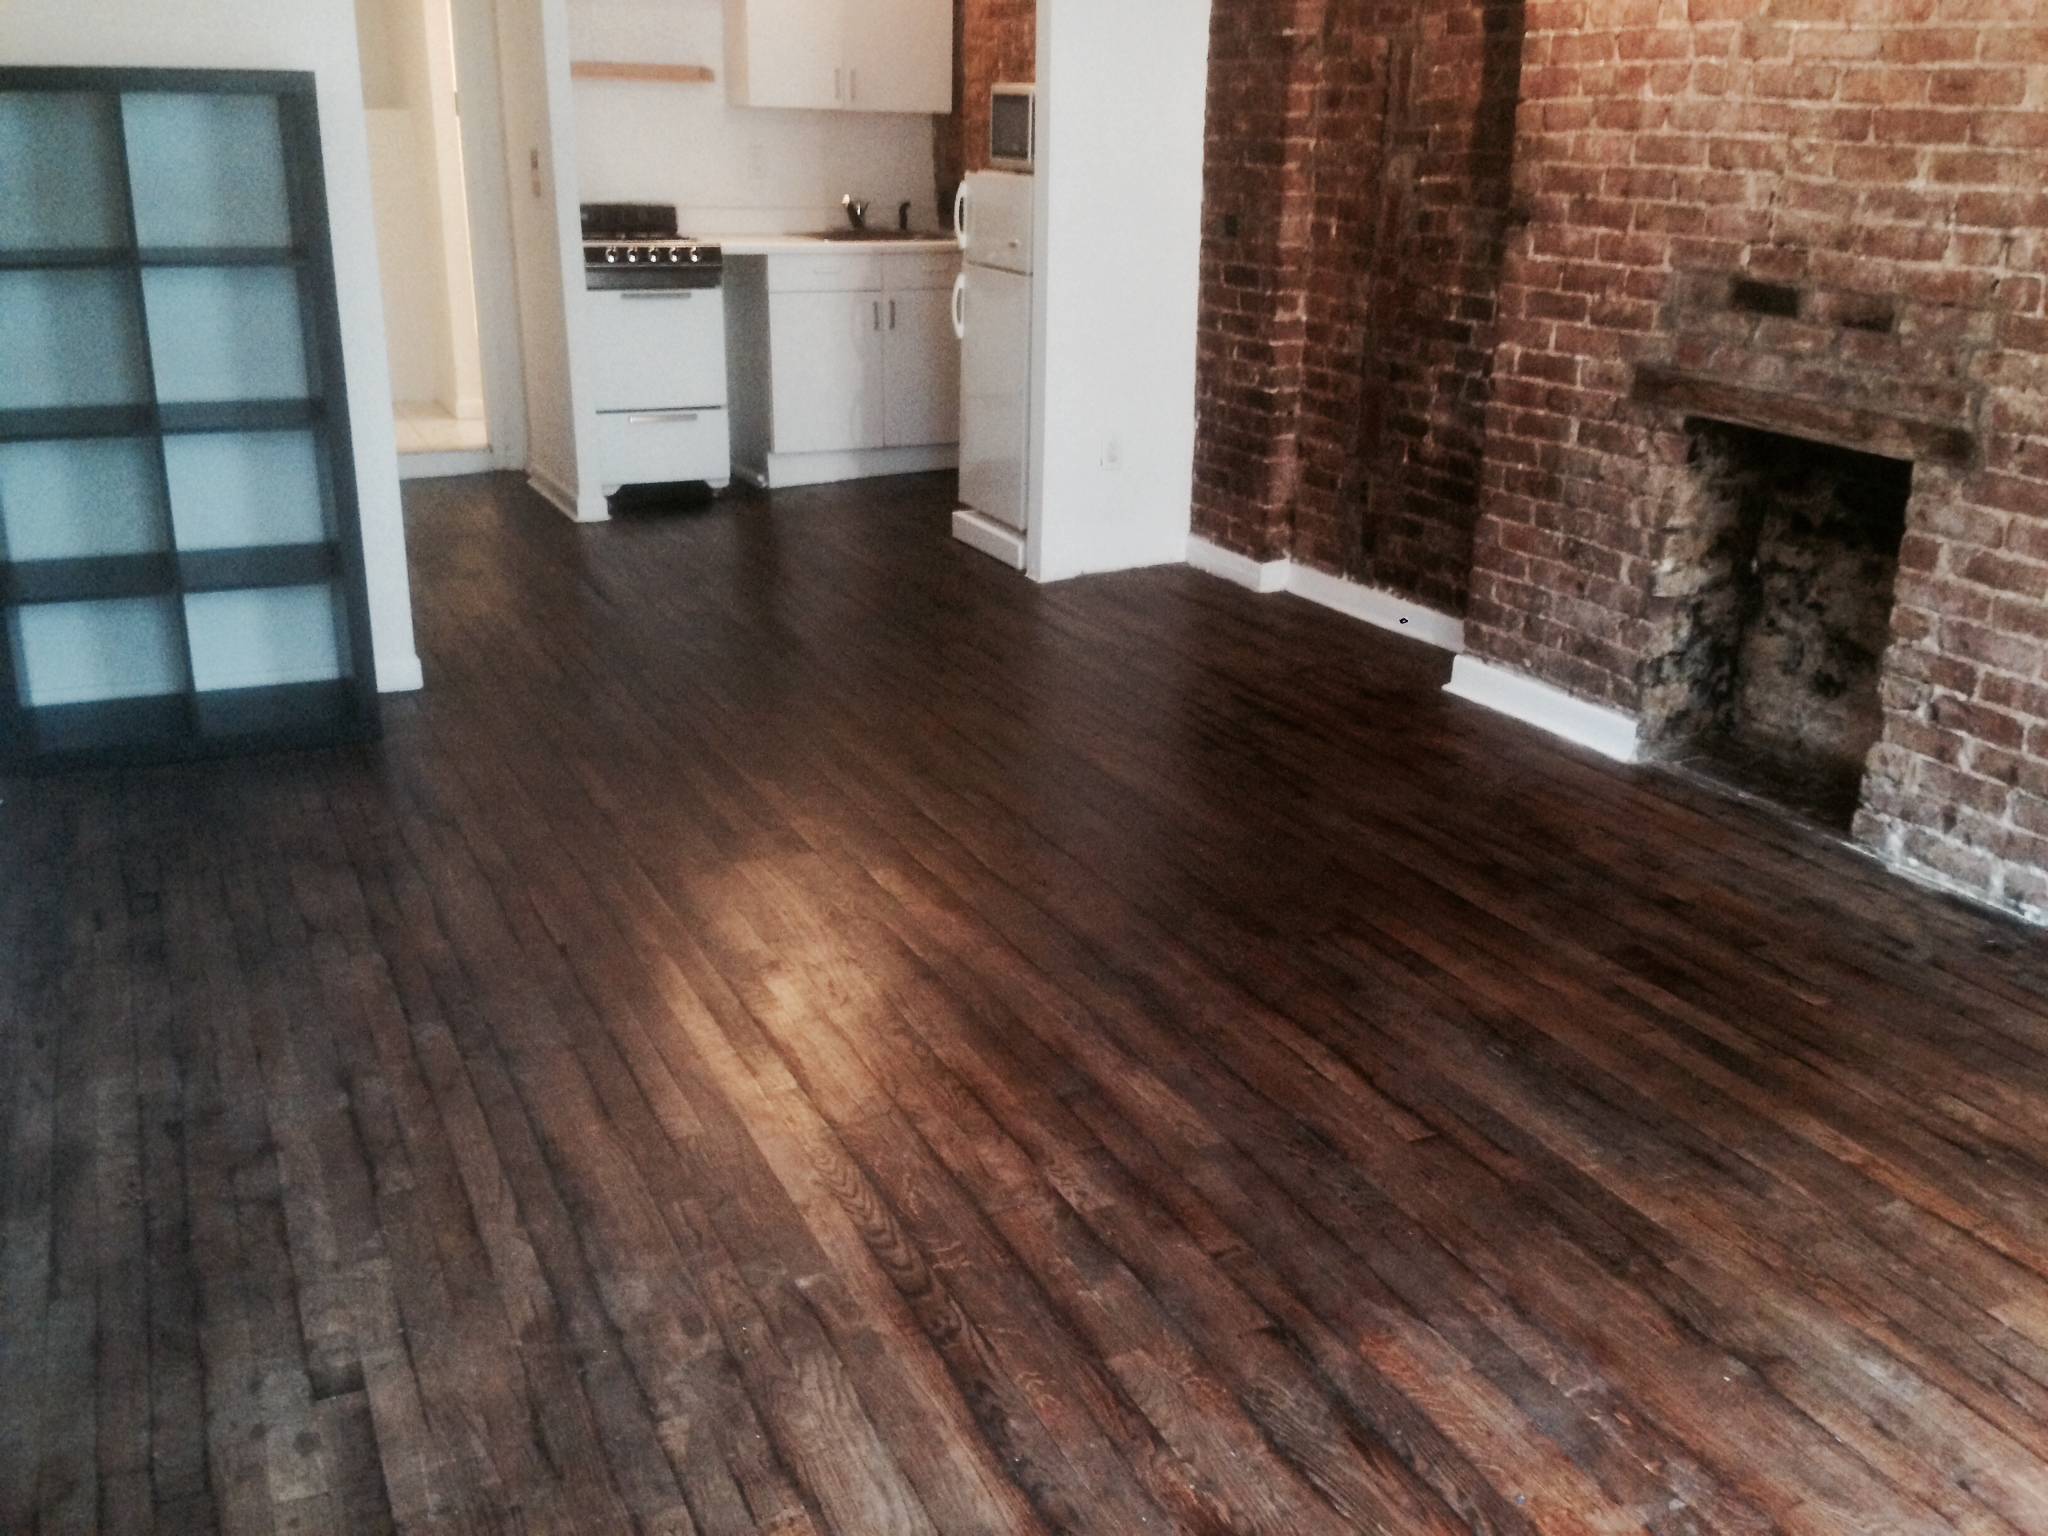 Midtown West:  Great Studio in Co-op Building - No Board Approval Required.